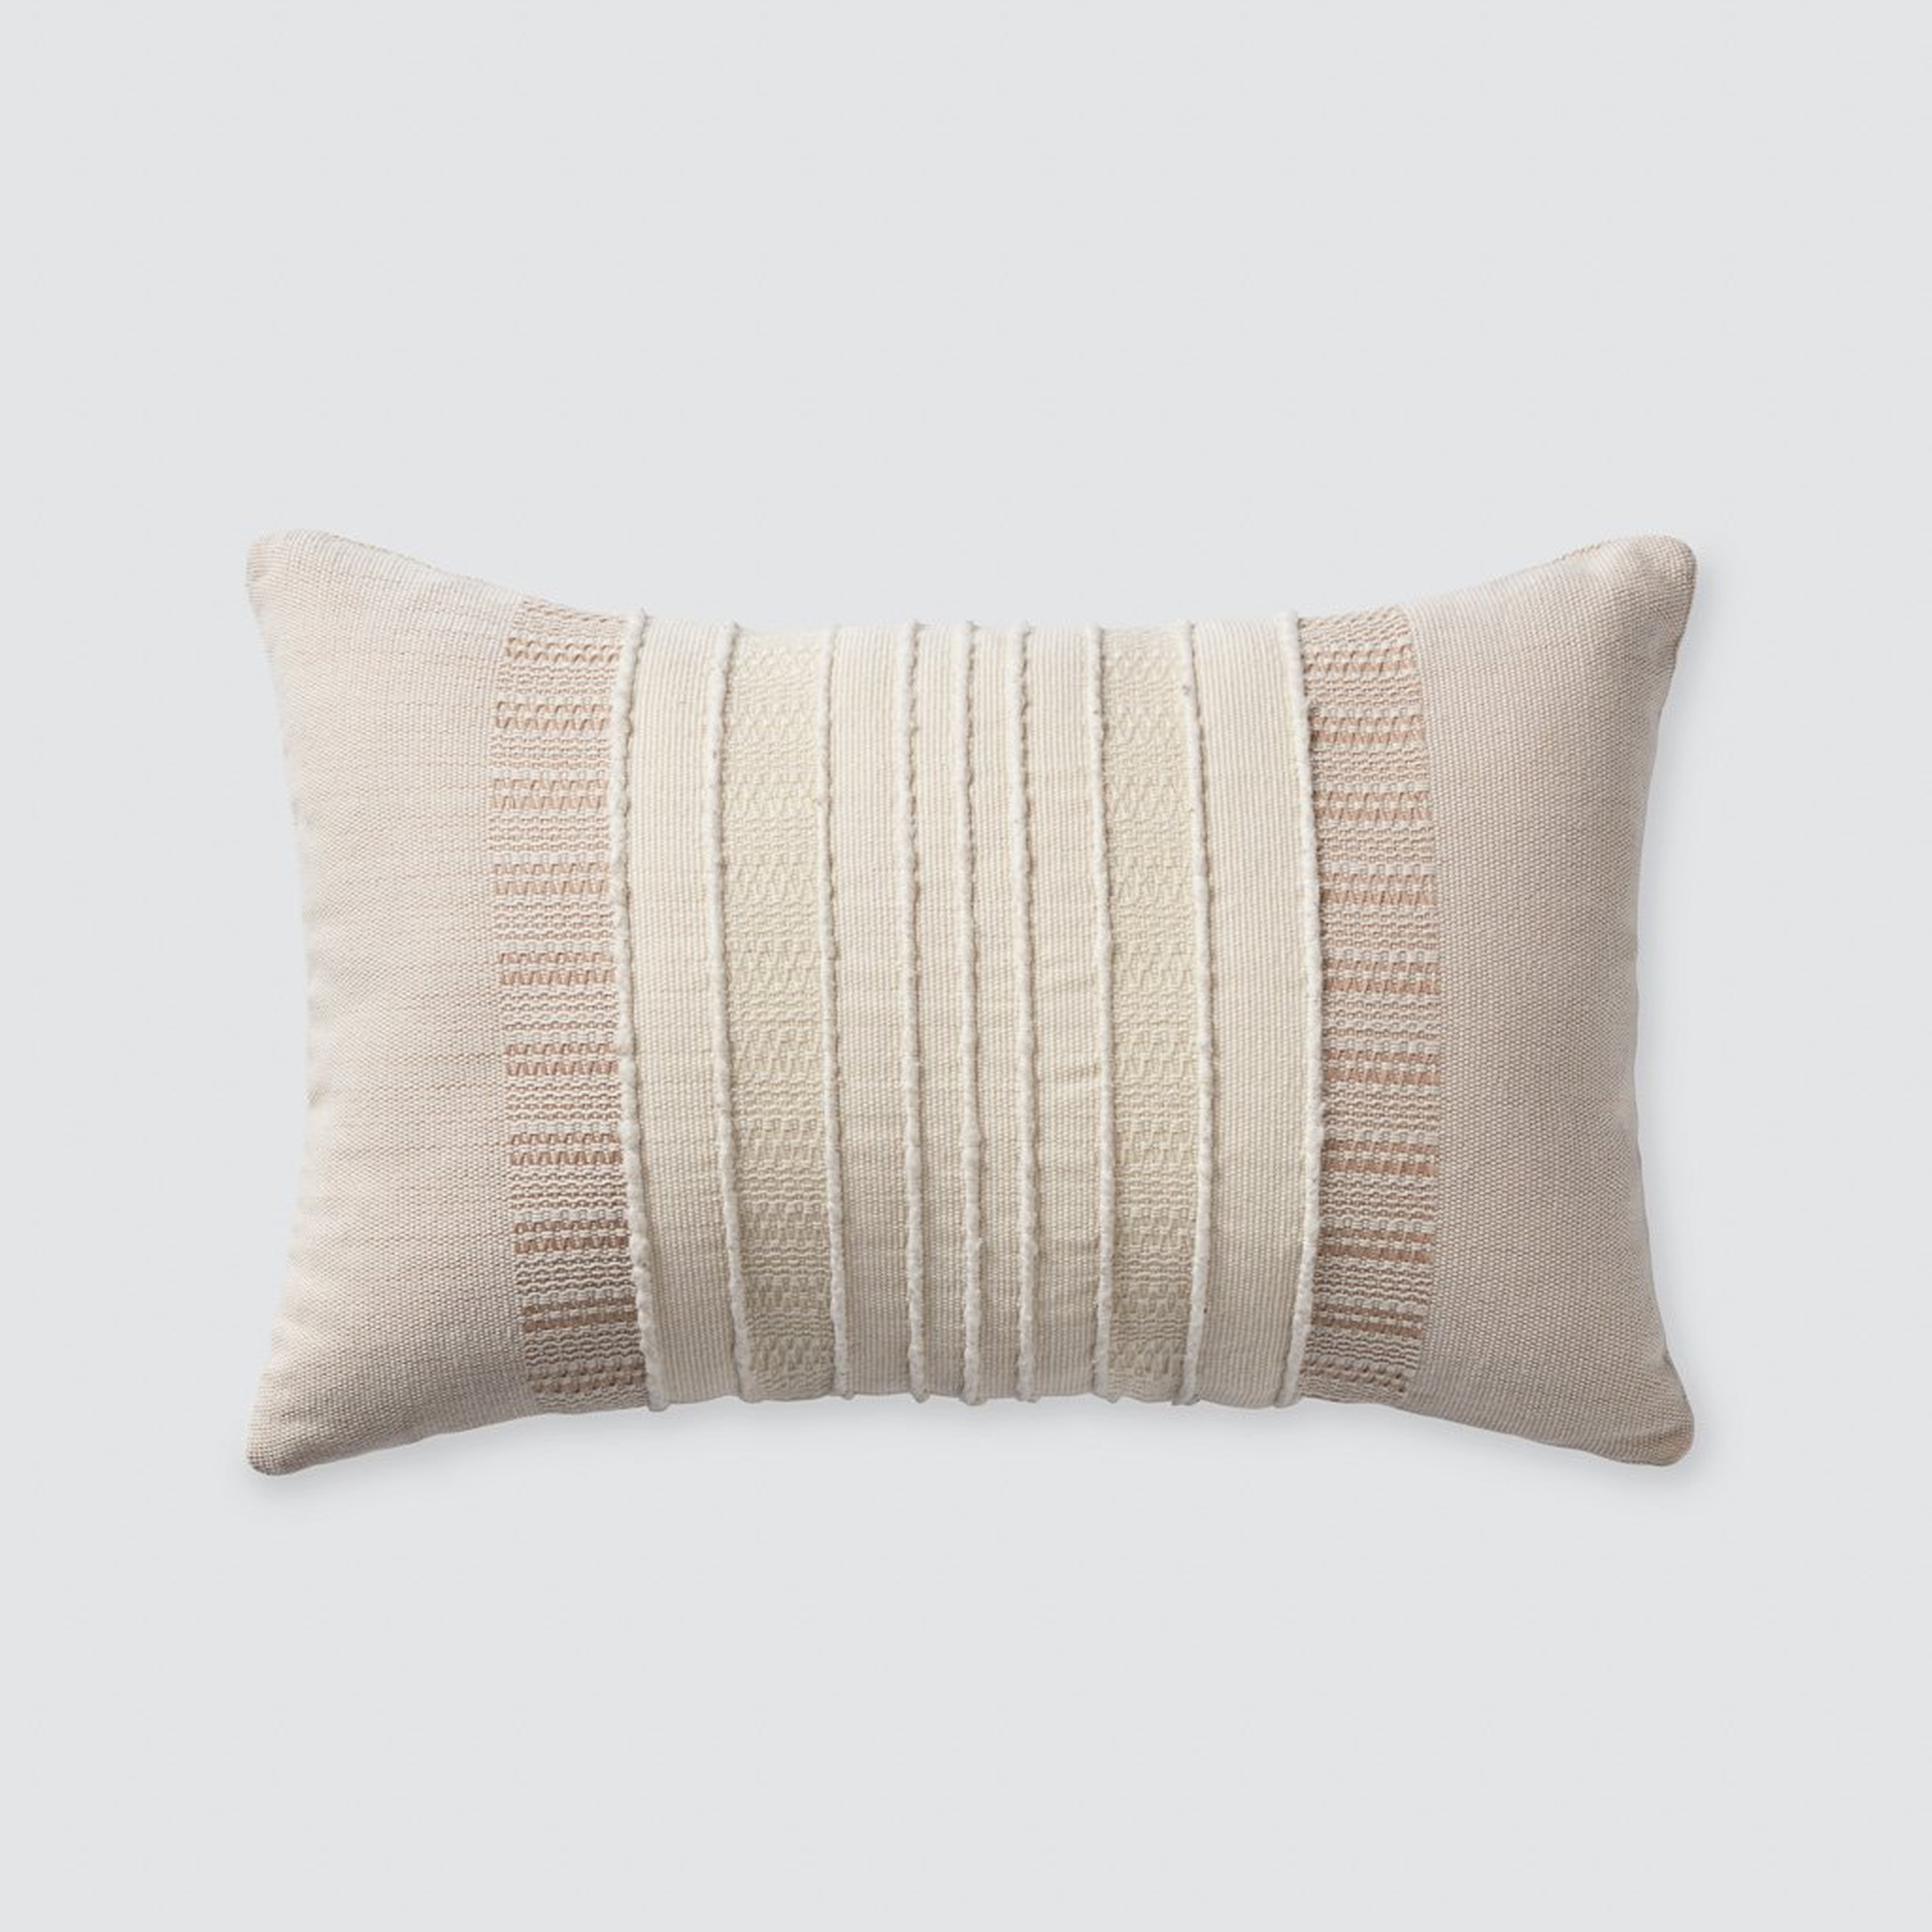 Botera Lumbar Pillow By The Citizenry - The Citizenry